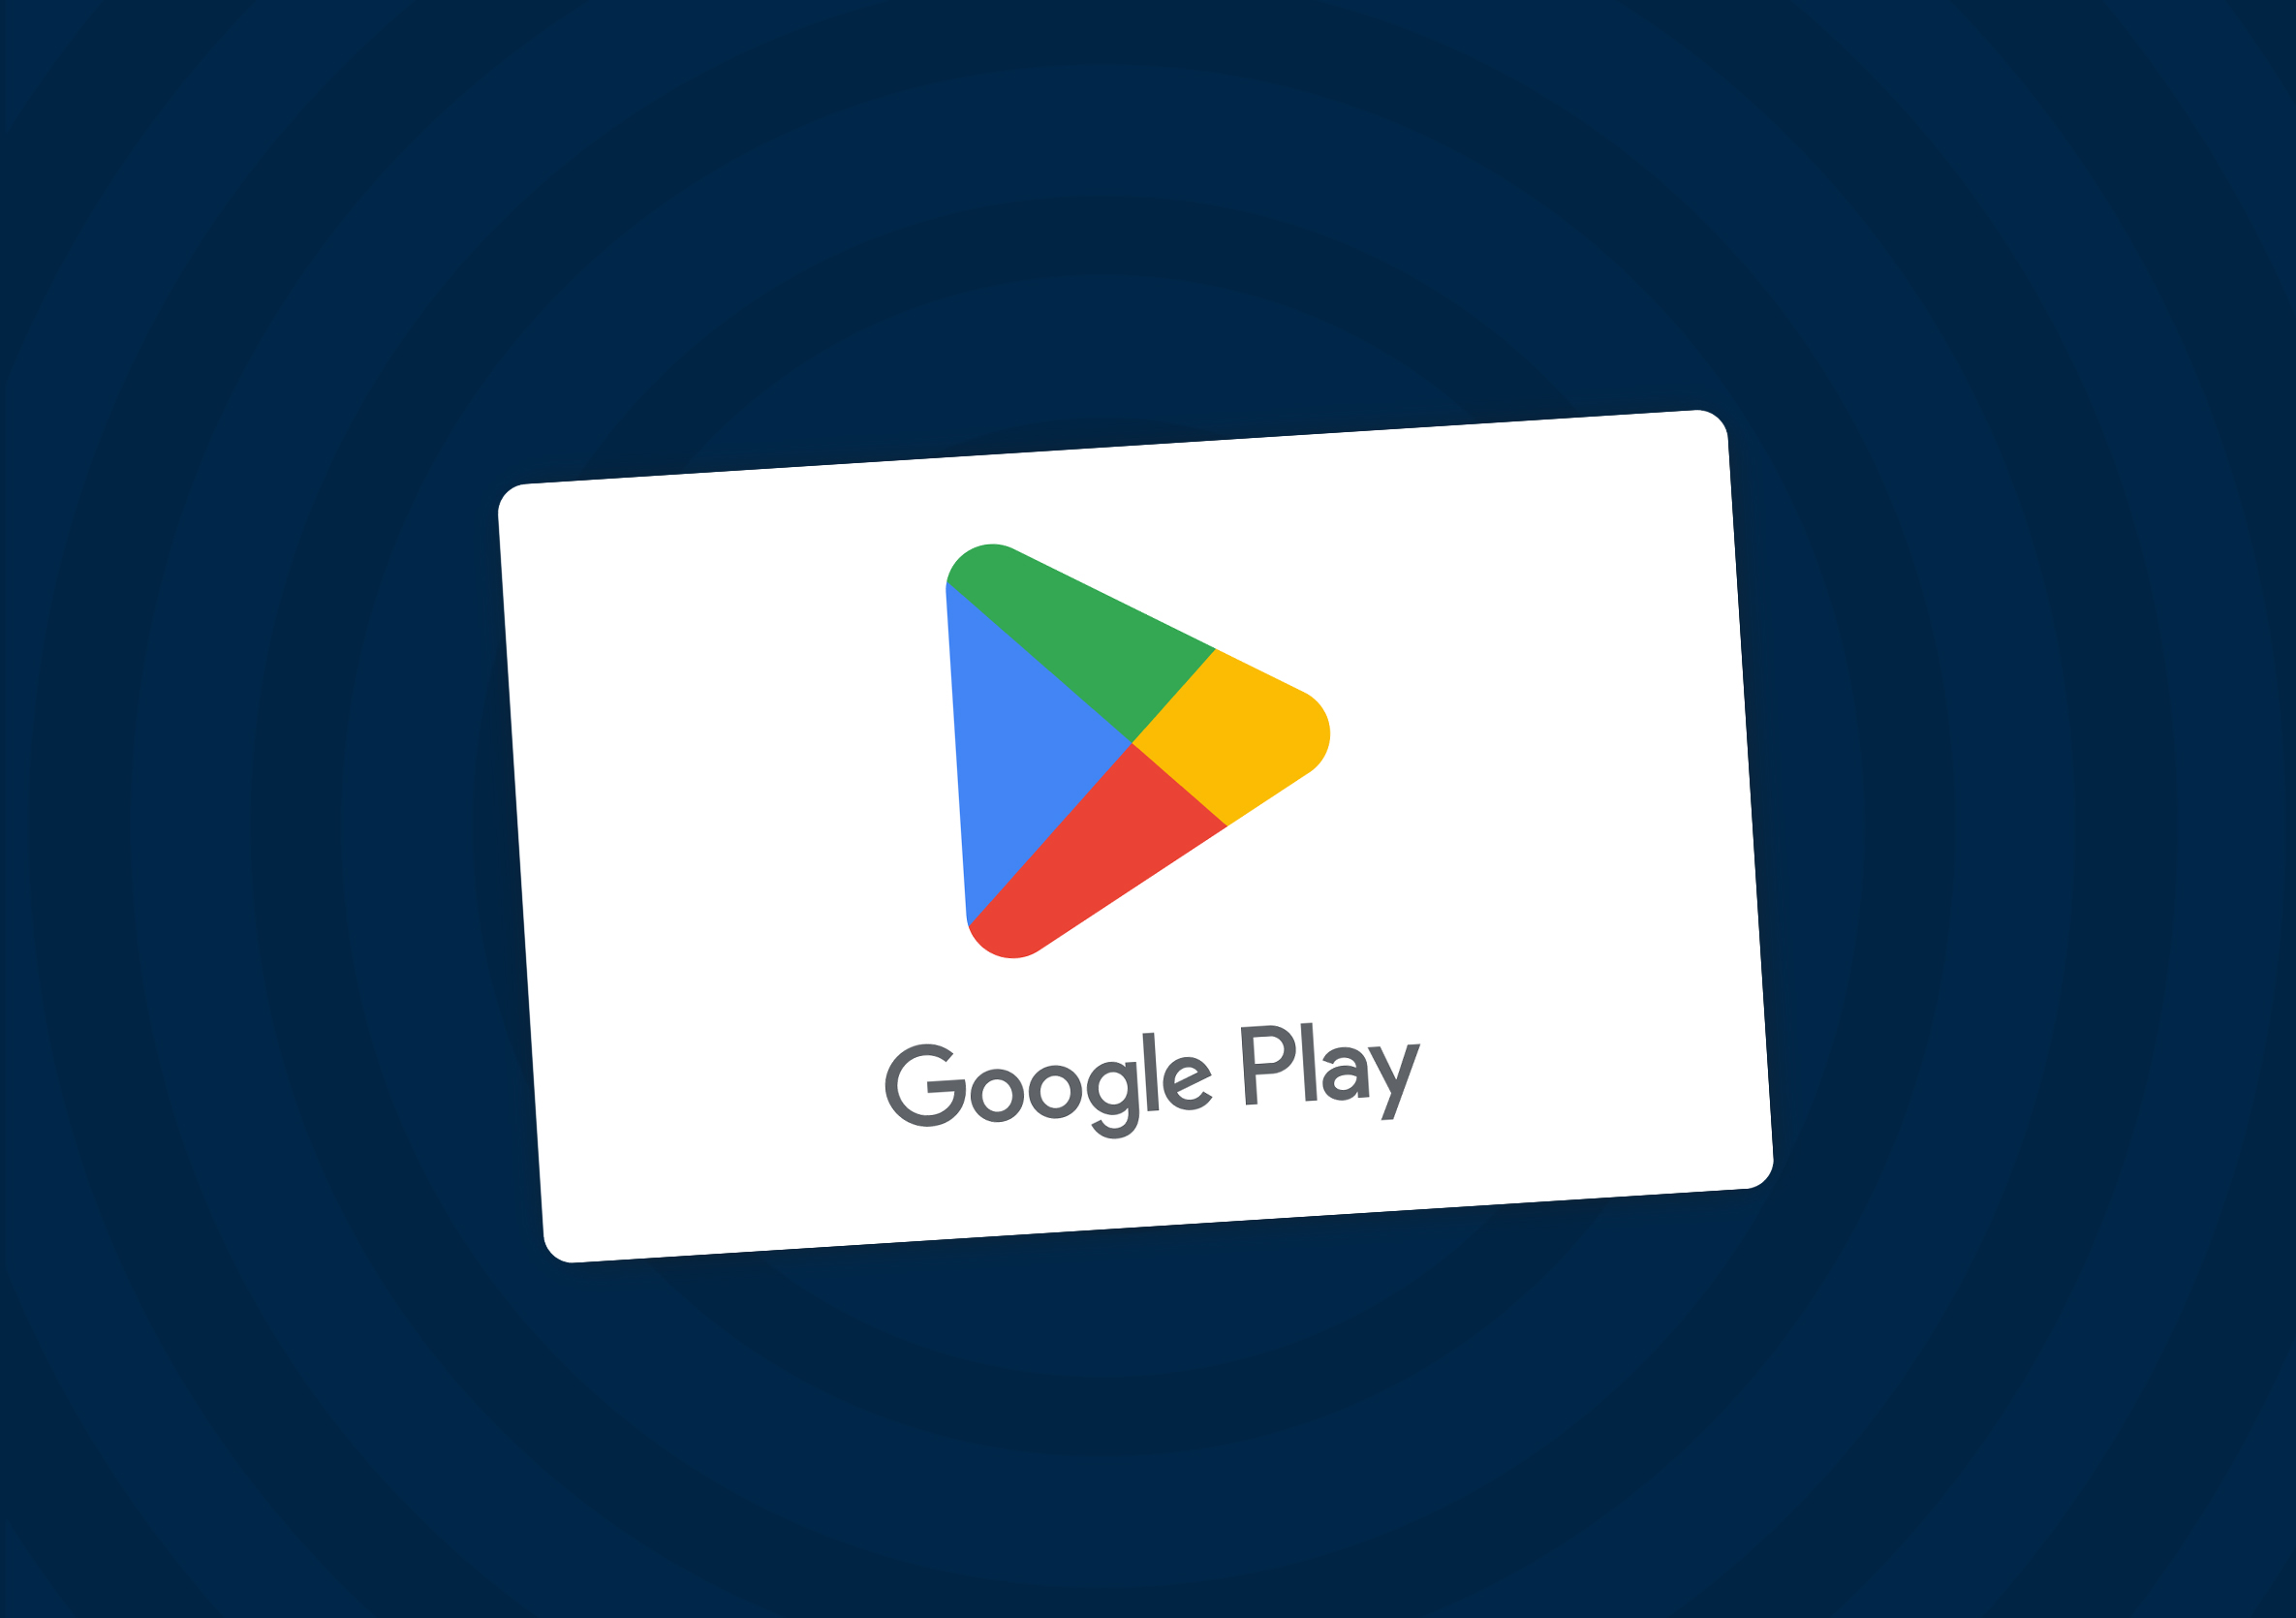 How To Convert Google Play Credit To Cash